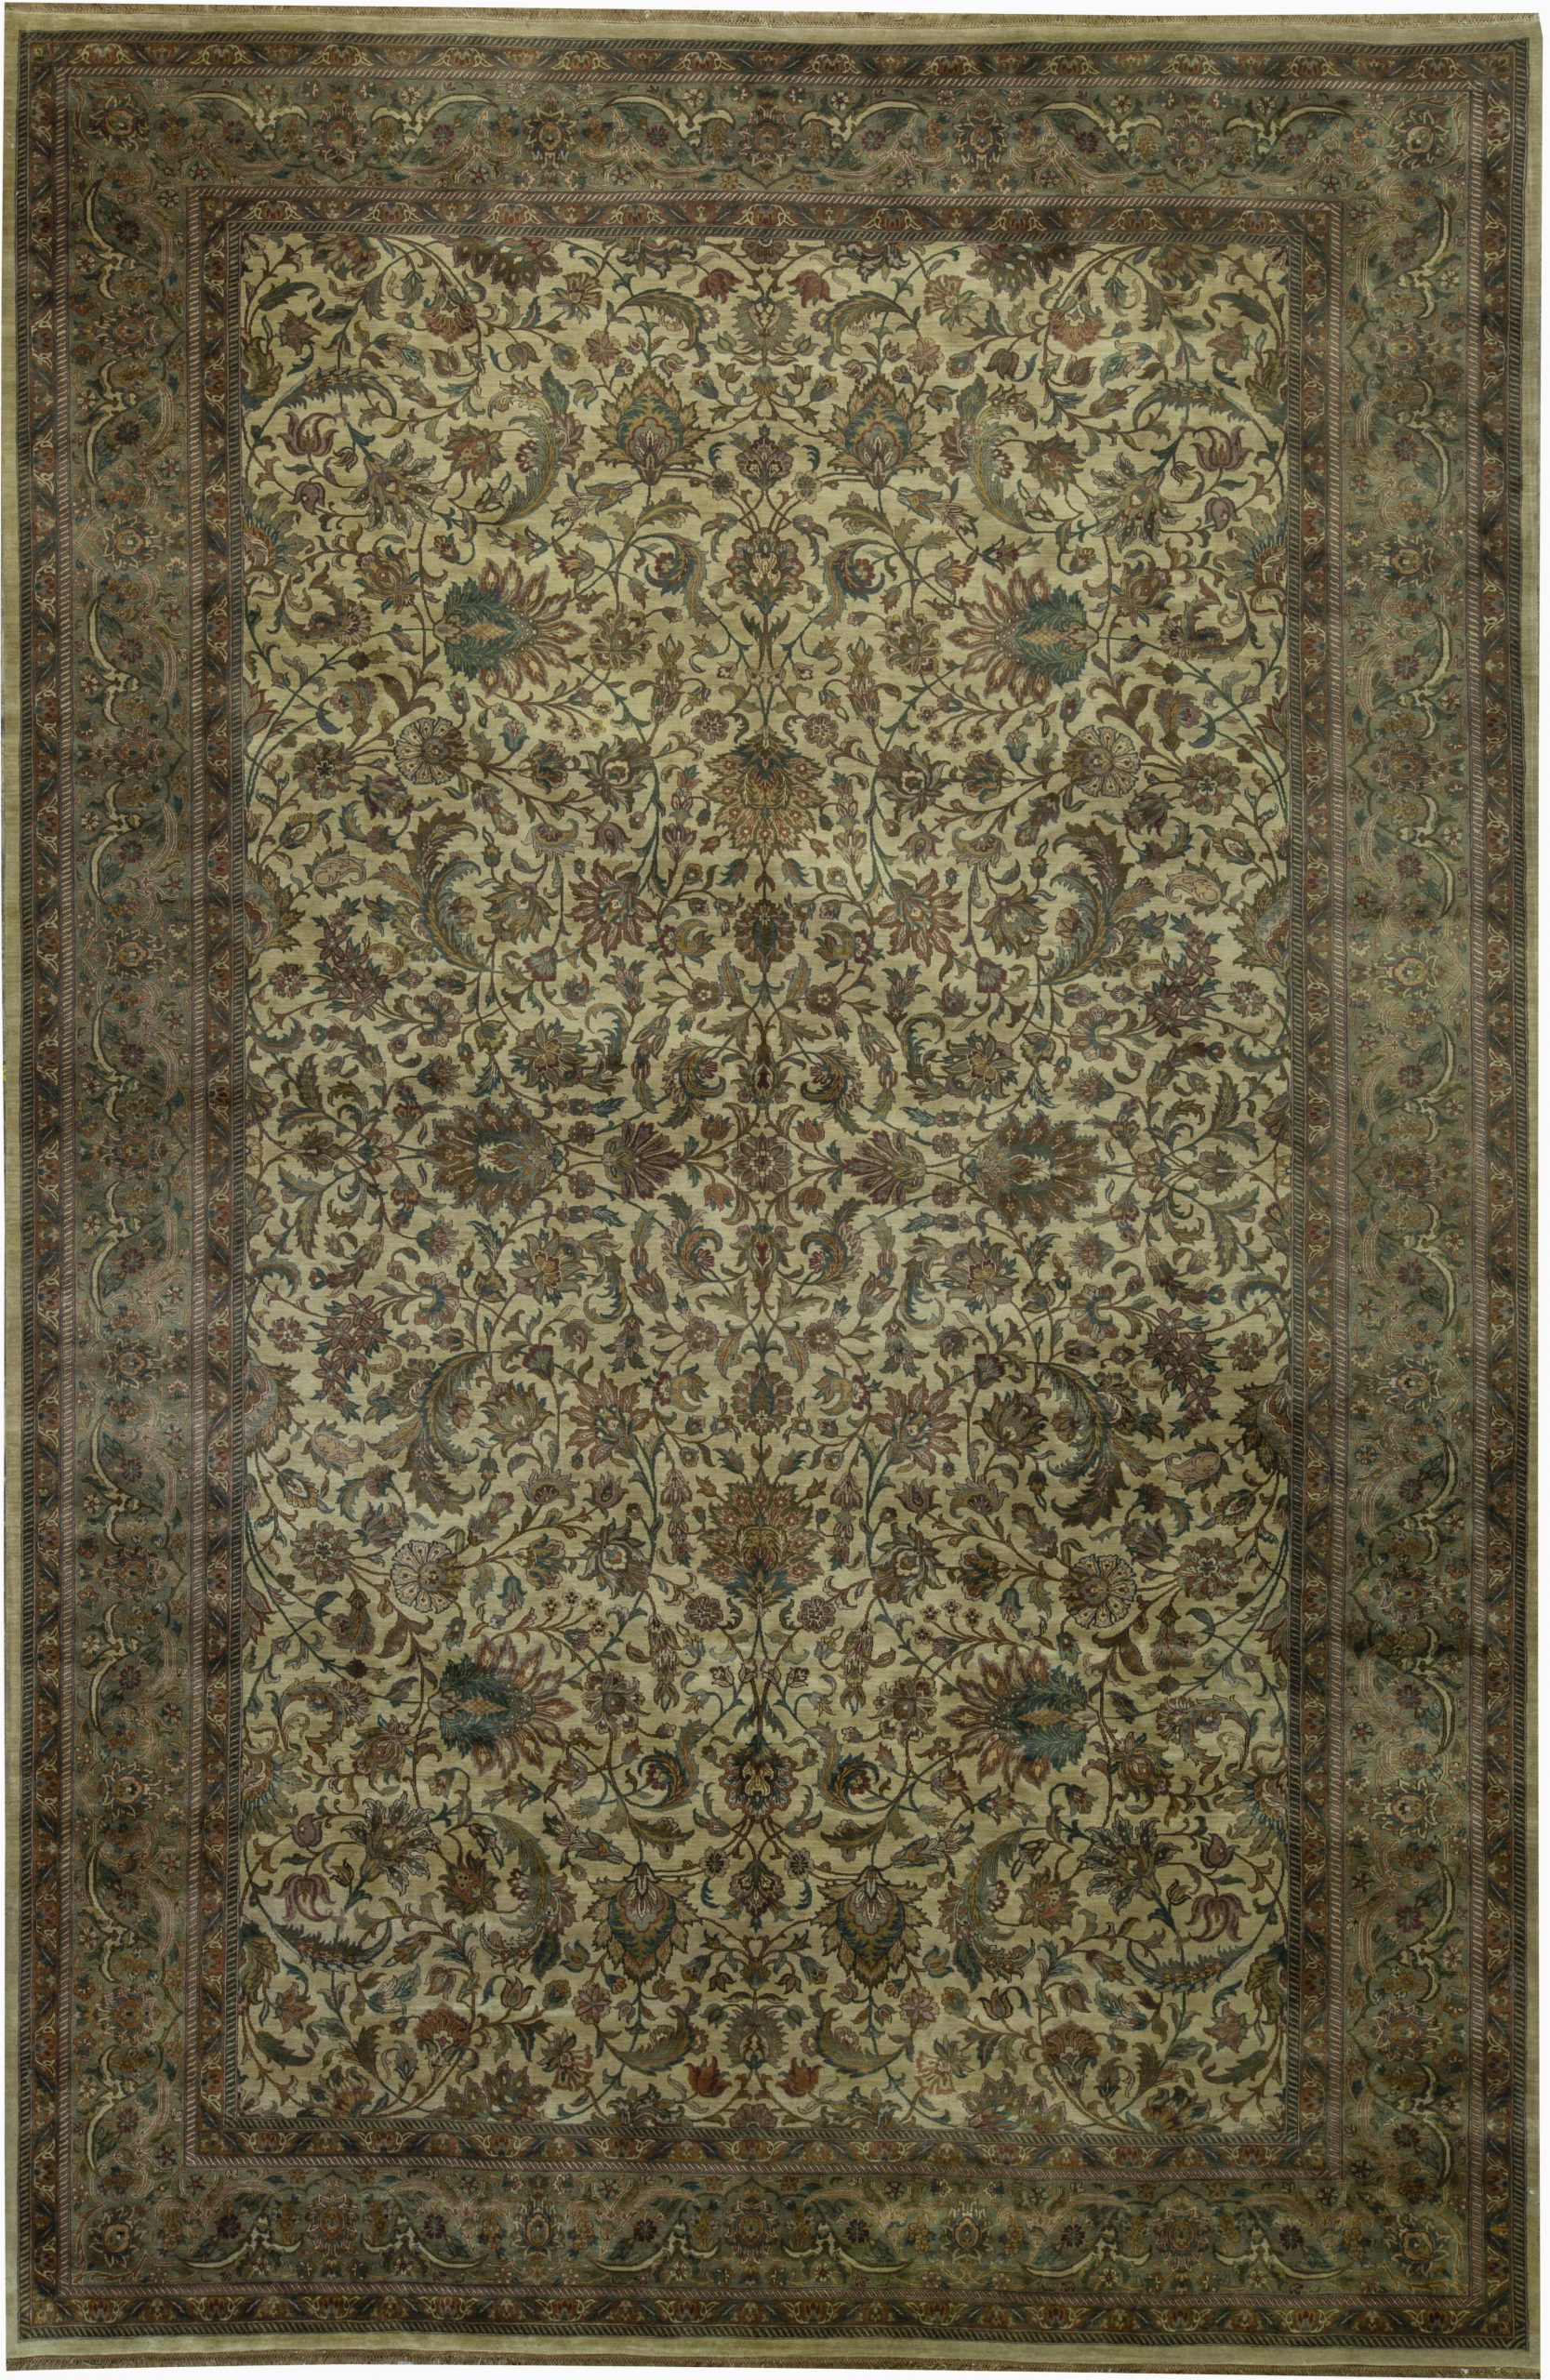 14 X 18 area Rugs E Of A Kind Bikaner Coll Handwoven 12 1" X 18 Wool Brown area Rug